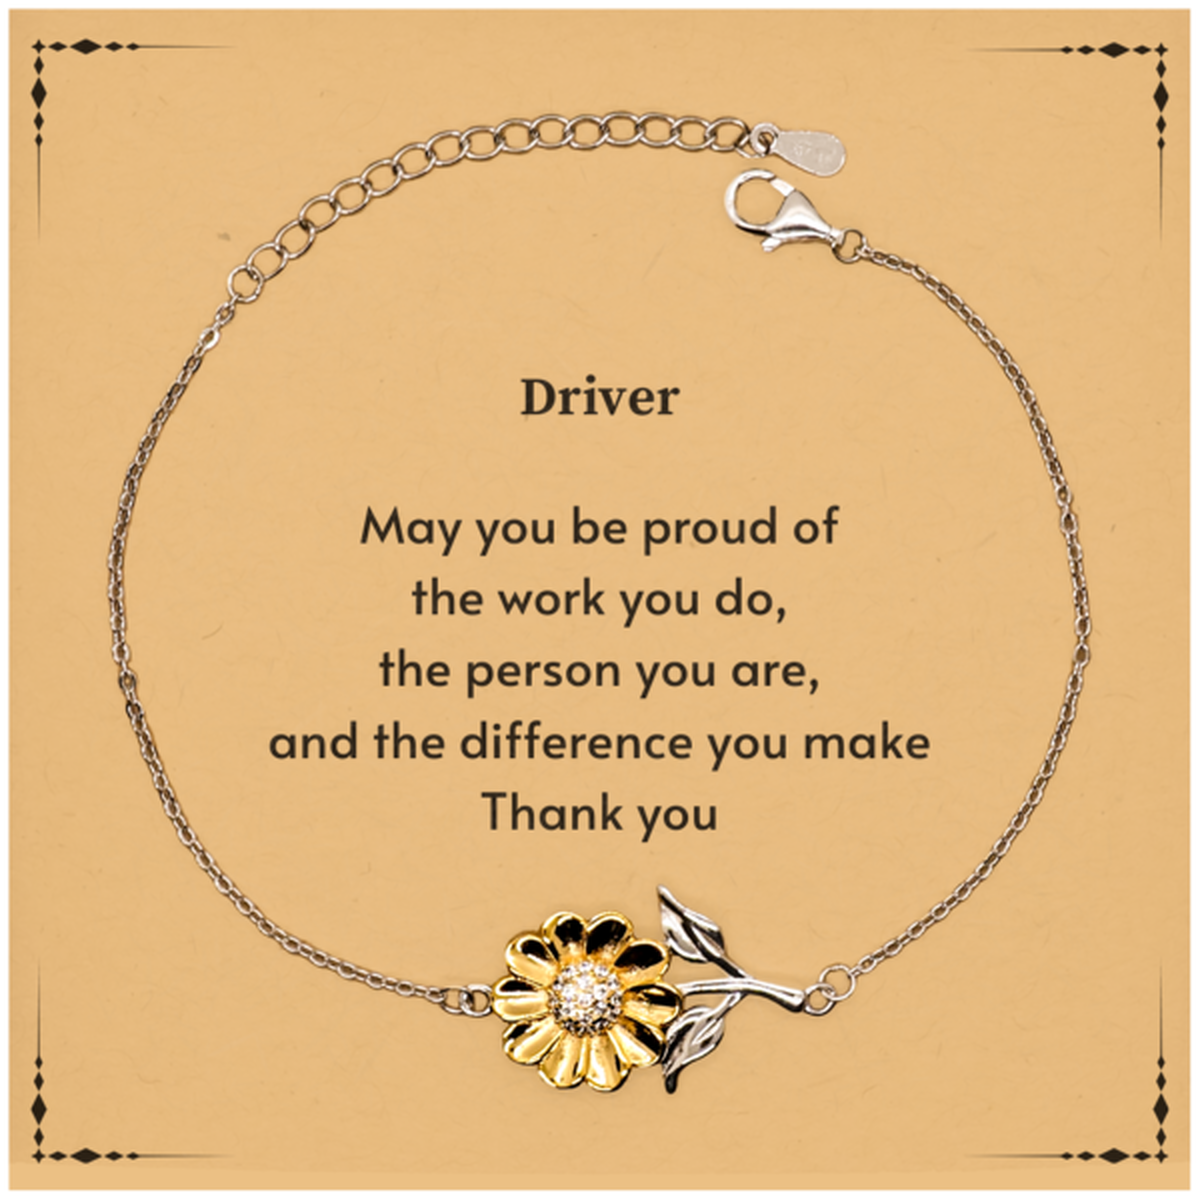 Heartwarming Sunflower Bracelet Retirement Coworkers Gifts for Driver, Driver May You be proud of the work you do, the person you are Gifts for Boss Men Women Friends